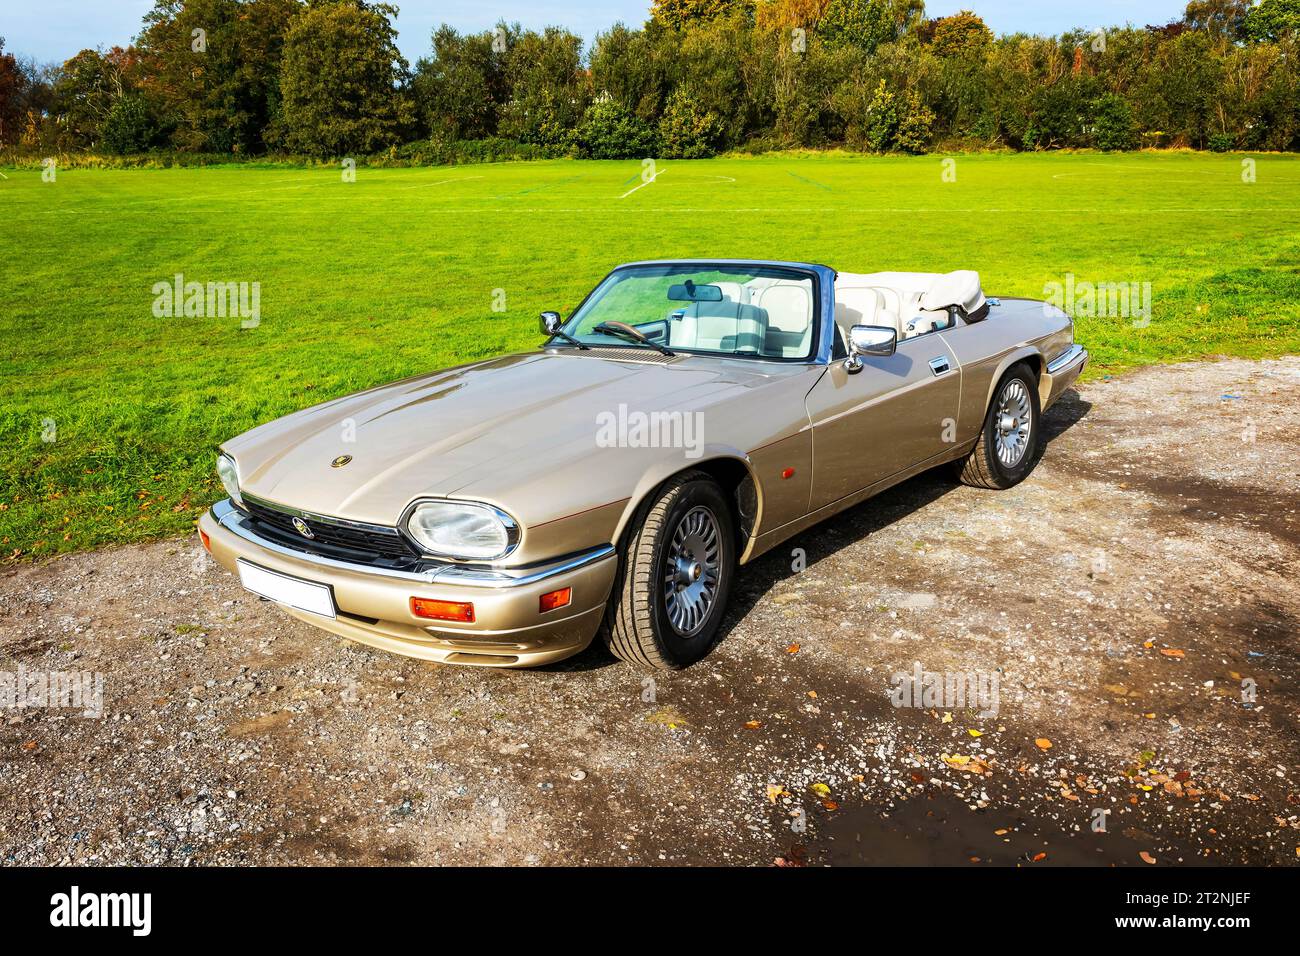 Convertible Jaguar XJS with top down on a gravel car park in the country Stock Photo